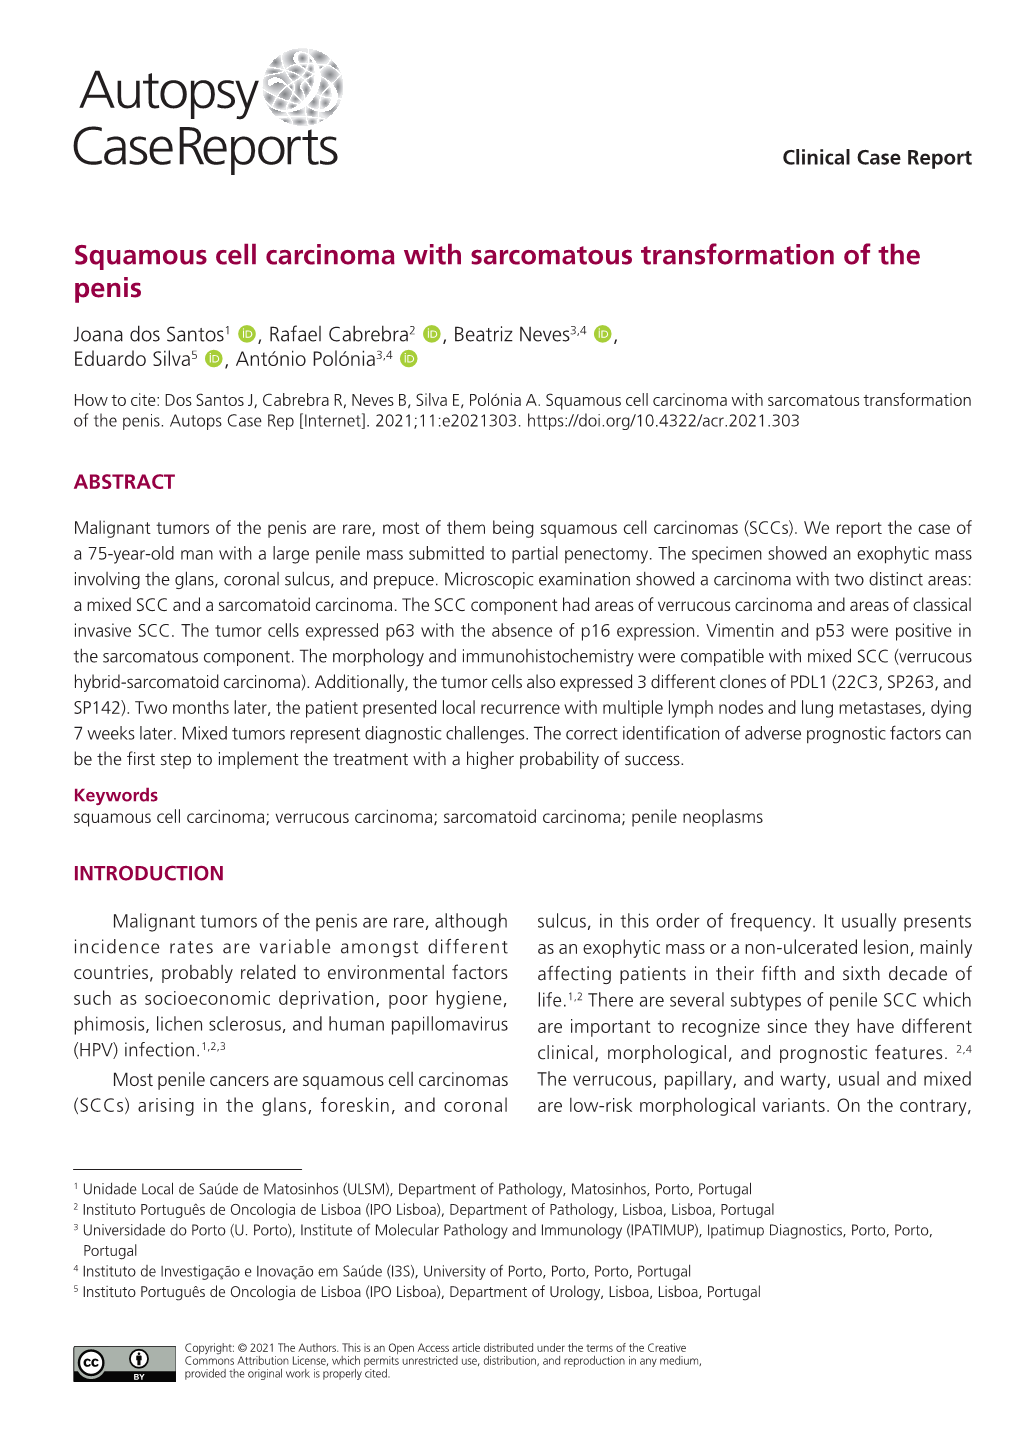 Squamous Cell Carcinoma with Sarcomatous Transformation of the Penis